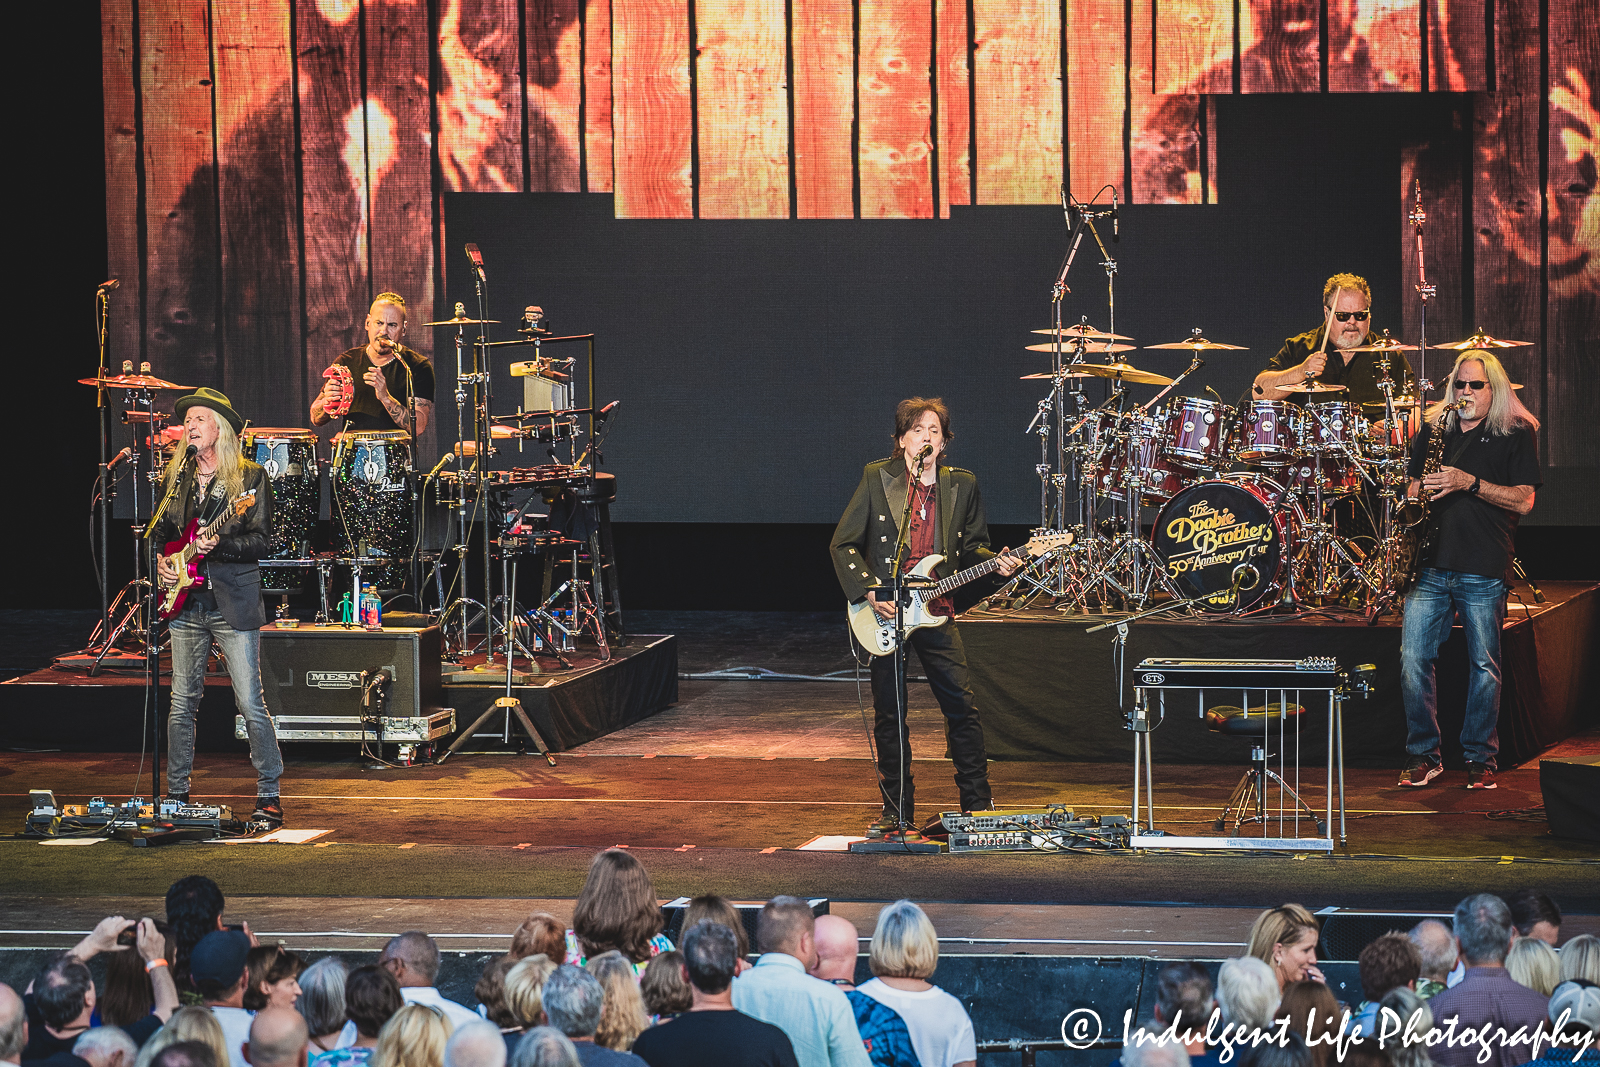 Founding members Patrick Simmons and John McFee of The Doobie Brothers live on stage with percussionist Marc Quiñones, drummer Ed Toth and saxophone player Marc Russo at Starlight Theatre in Kansas City, MO on June 14, 2023.